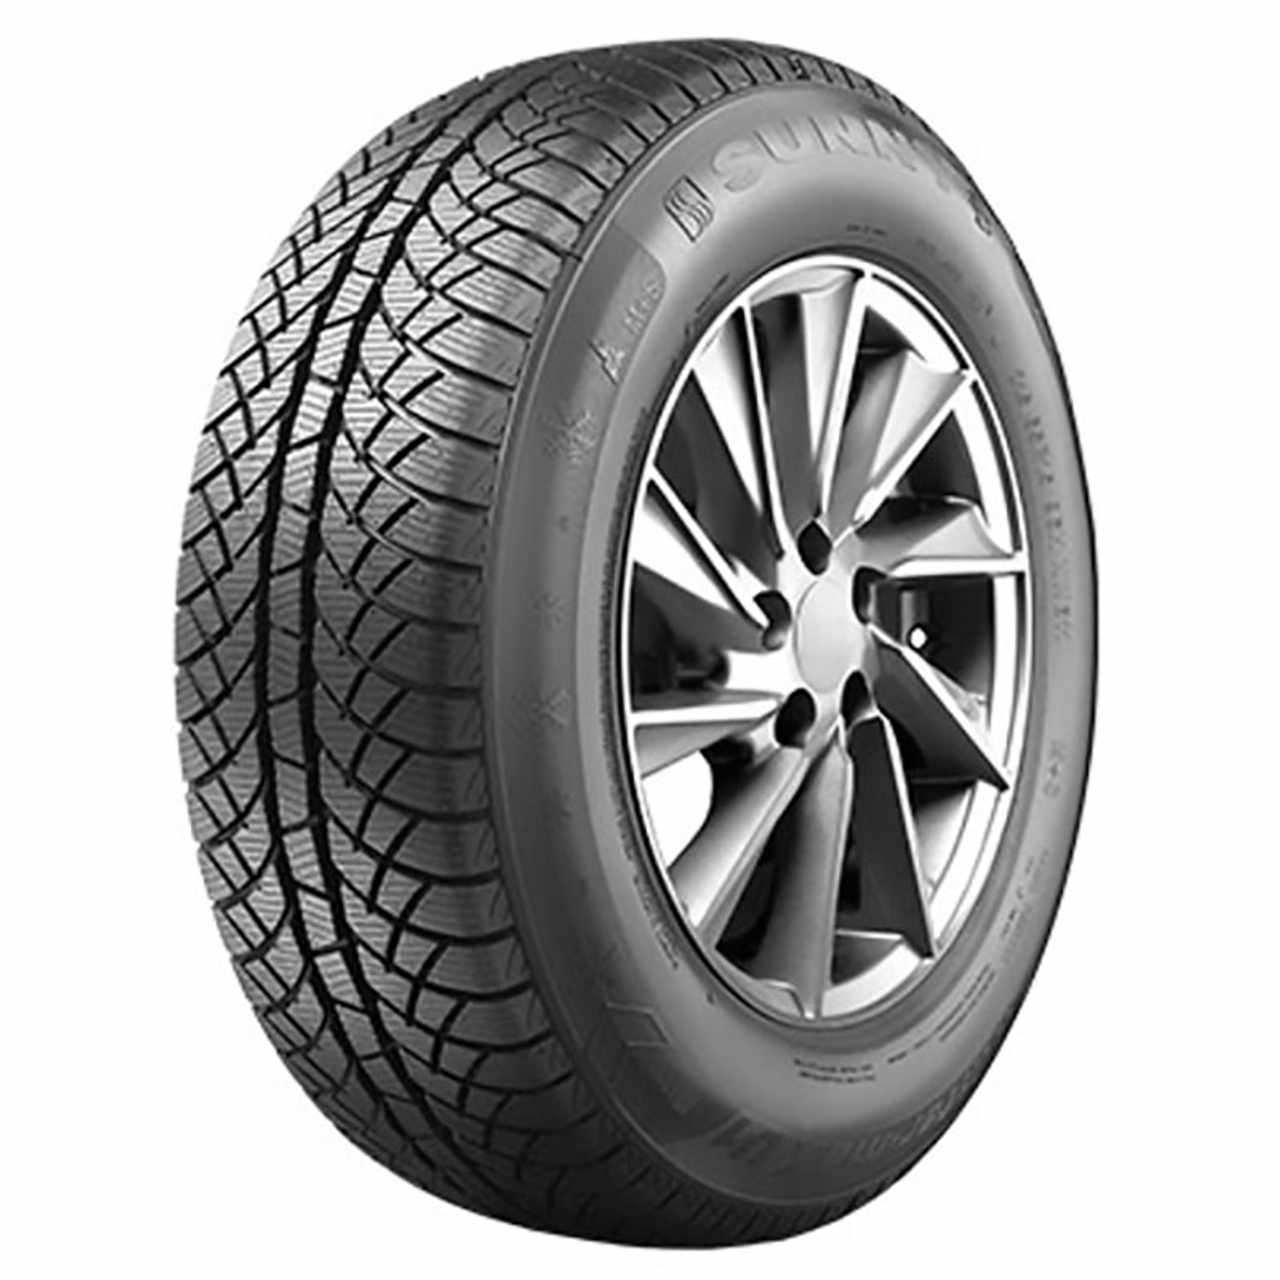 SUNNY WINTERMAX NW611 185/60R15 88T BSW XL